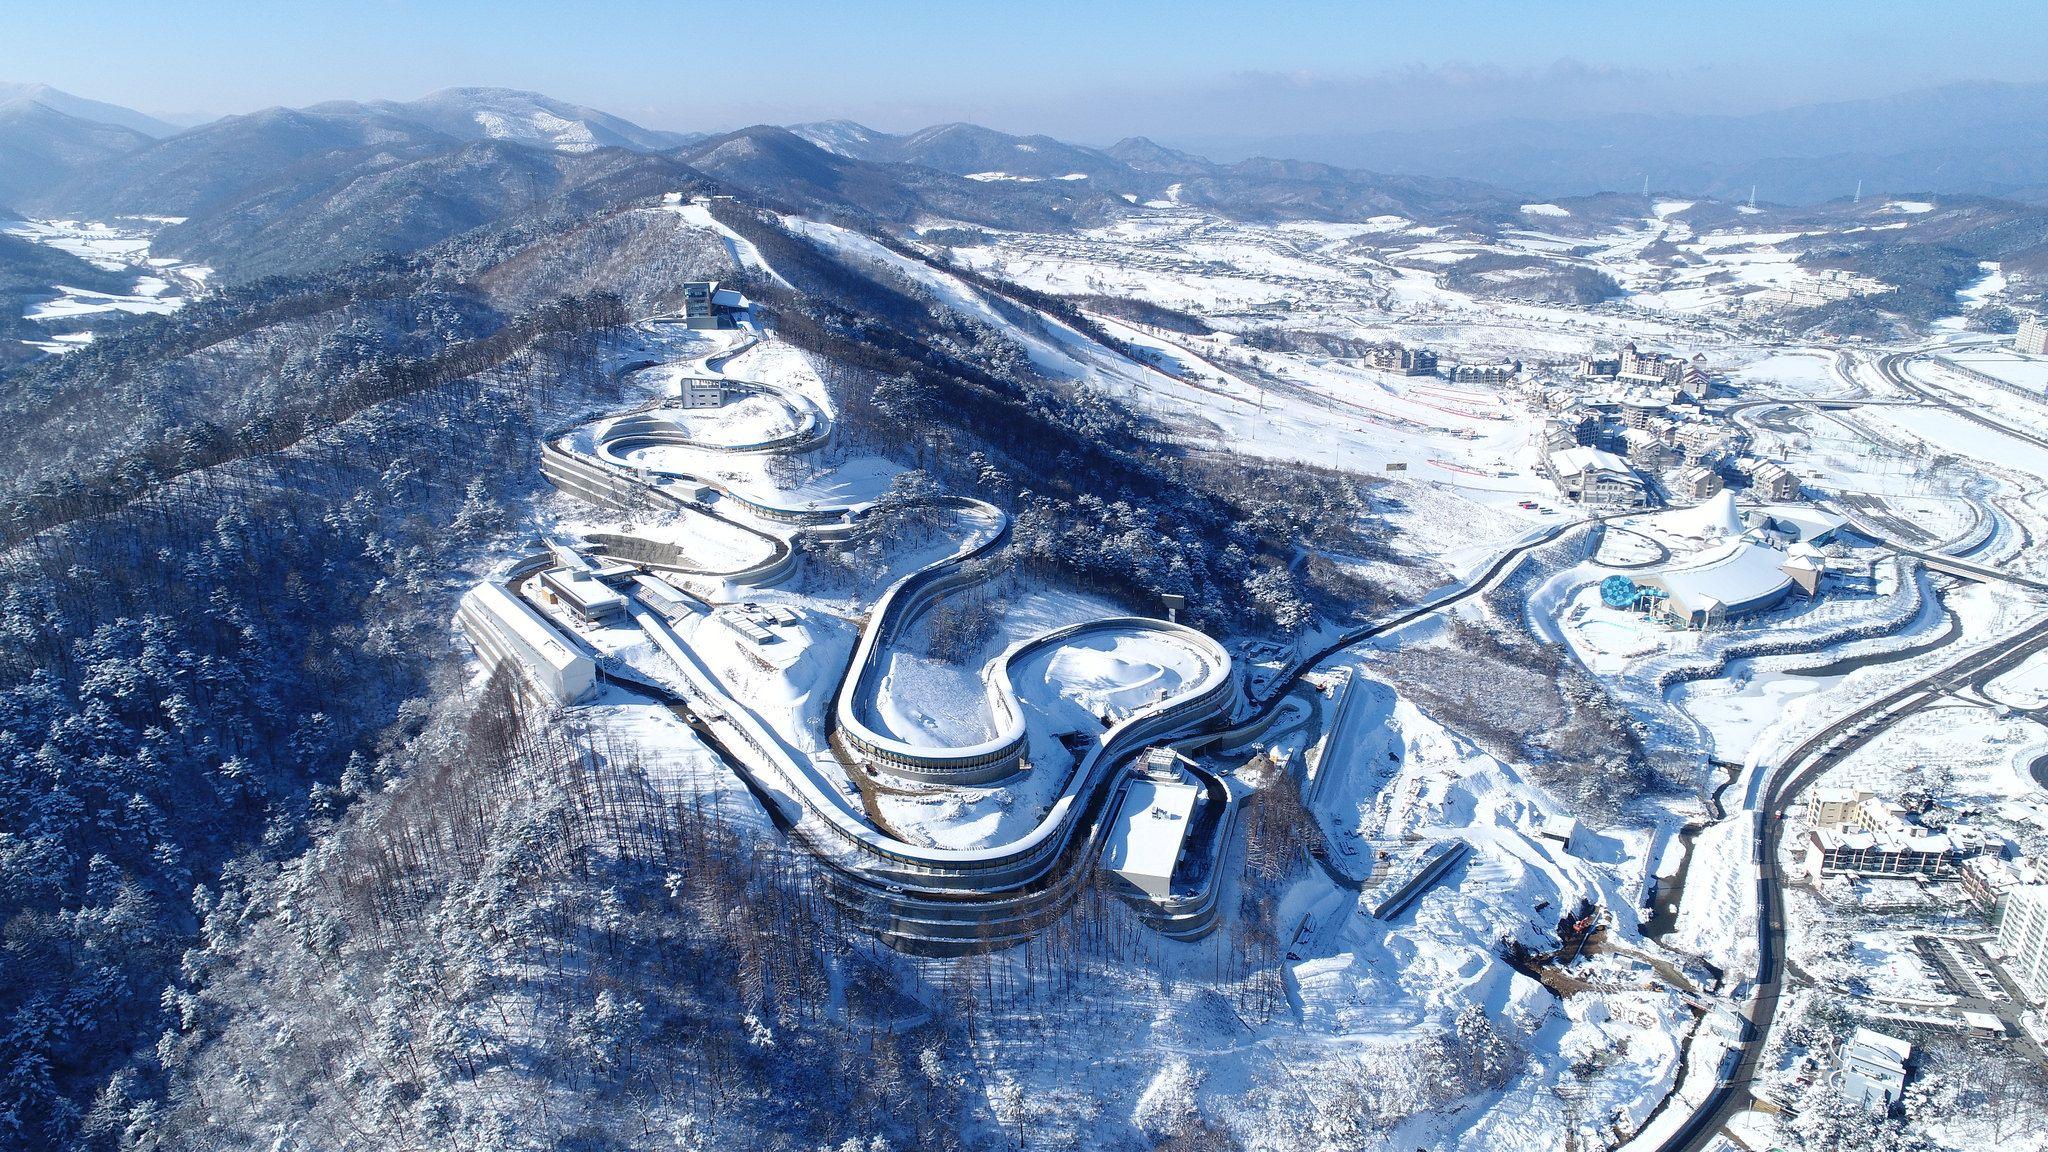 The Olympic Winter Games PyeongChang 2018